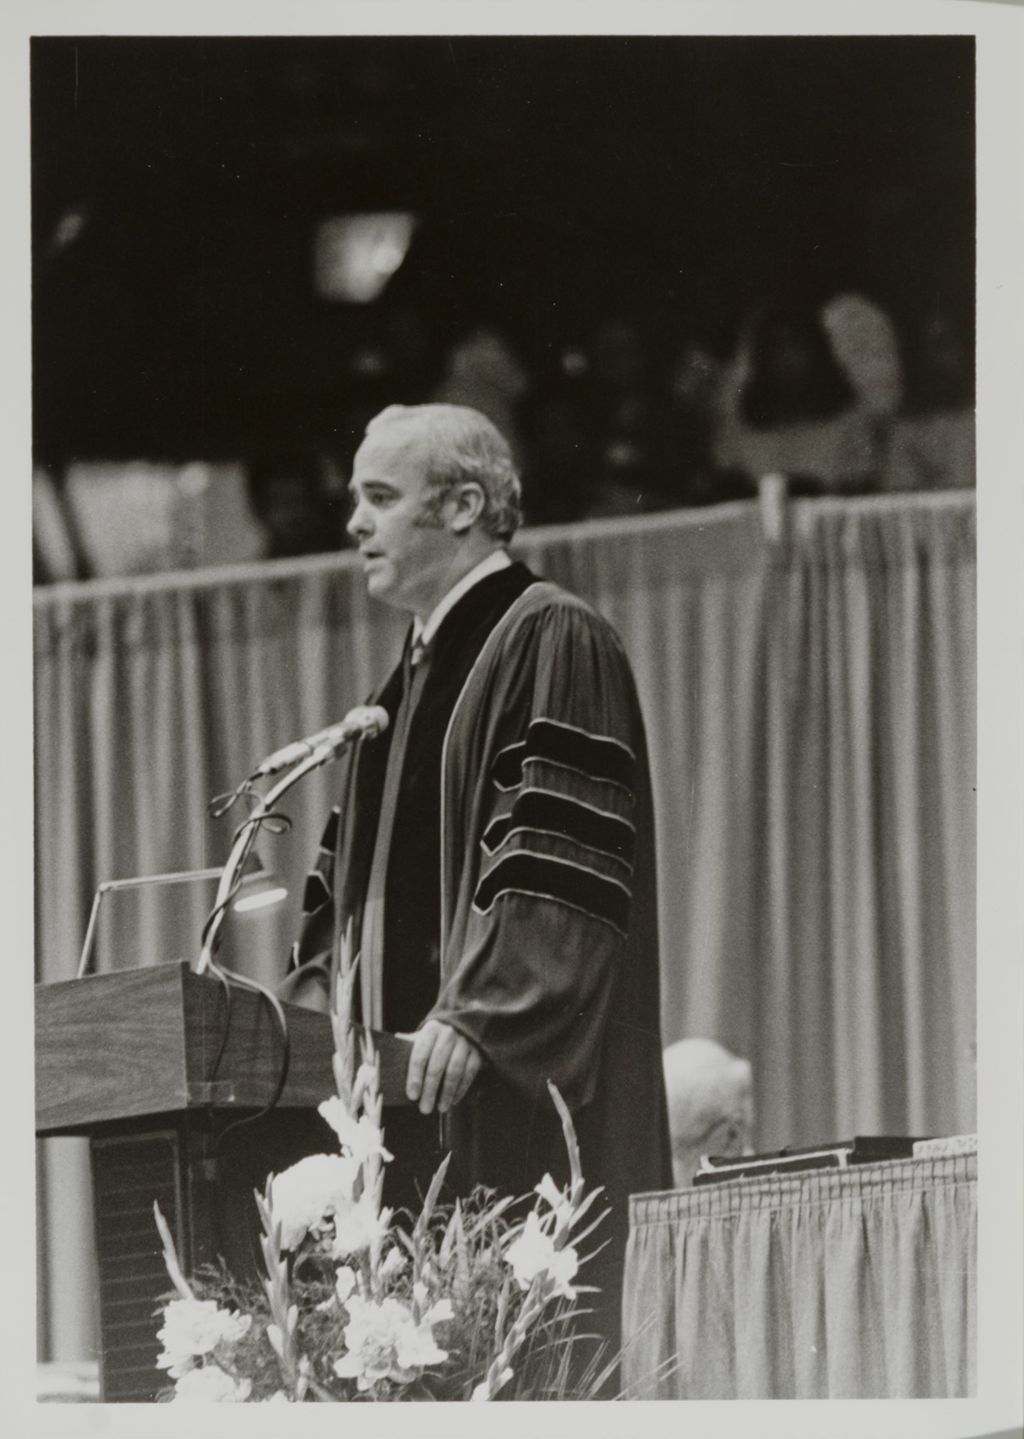 William D. Forsyth, Jr. addressing the audience at the graduation ceremony